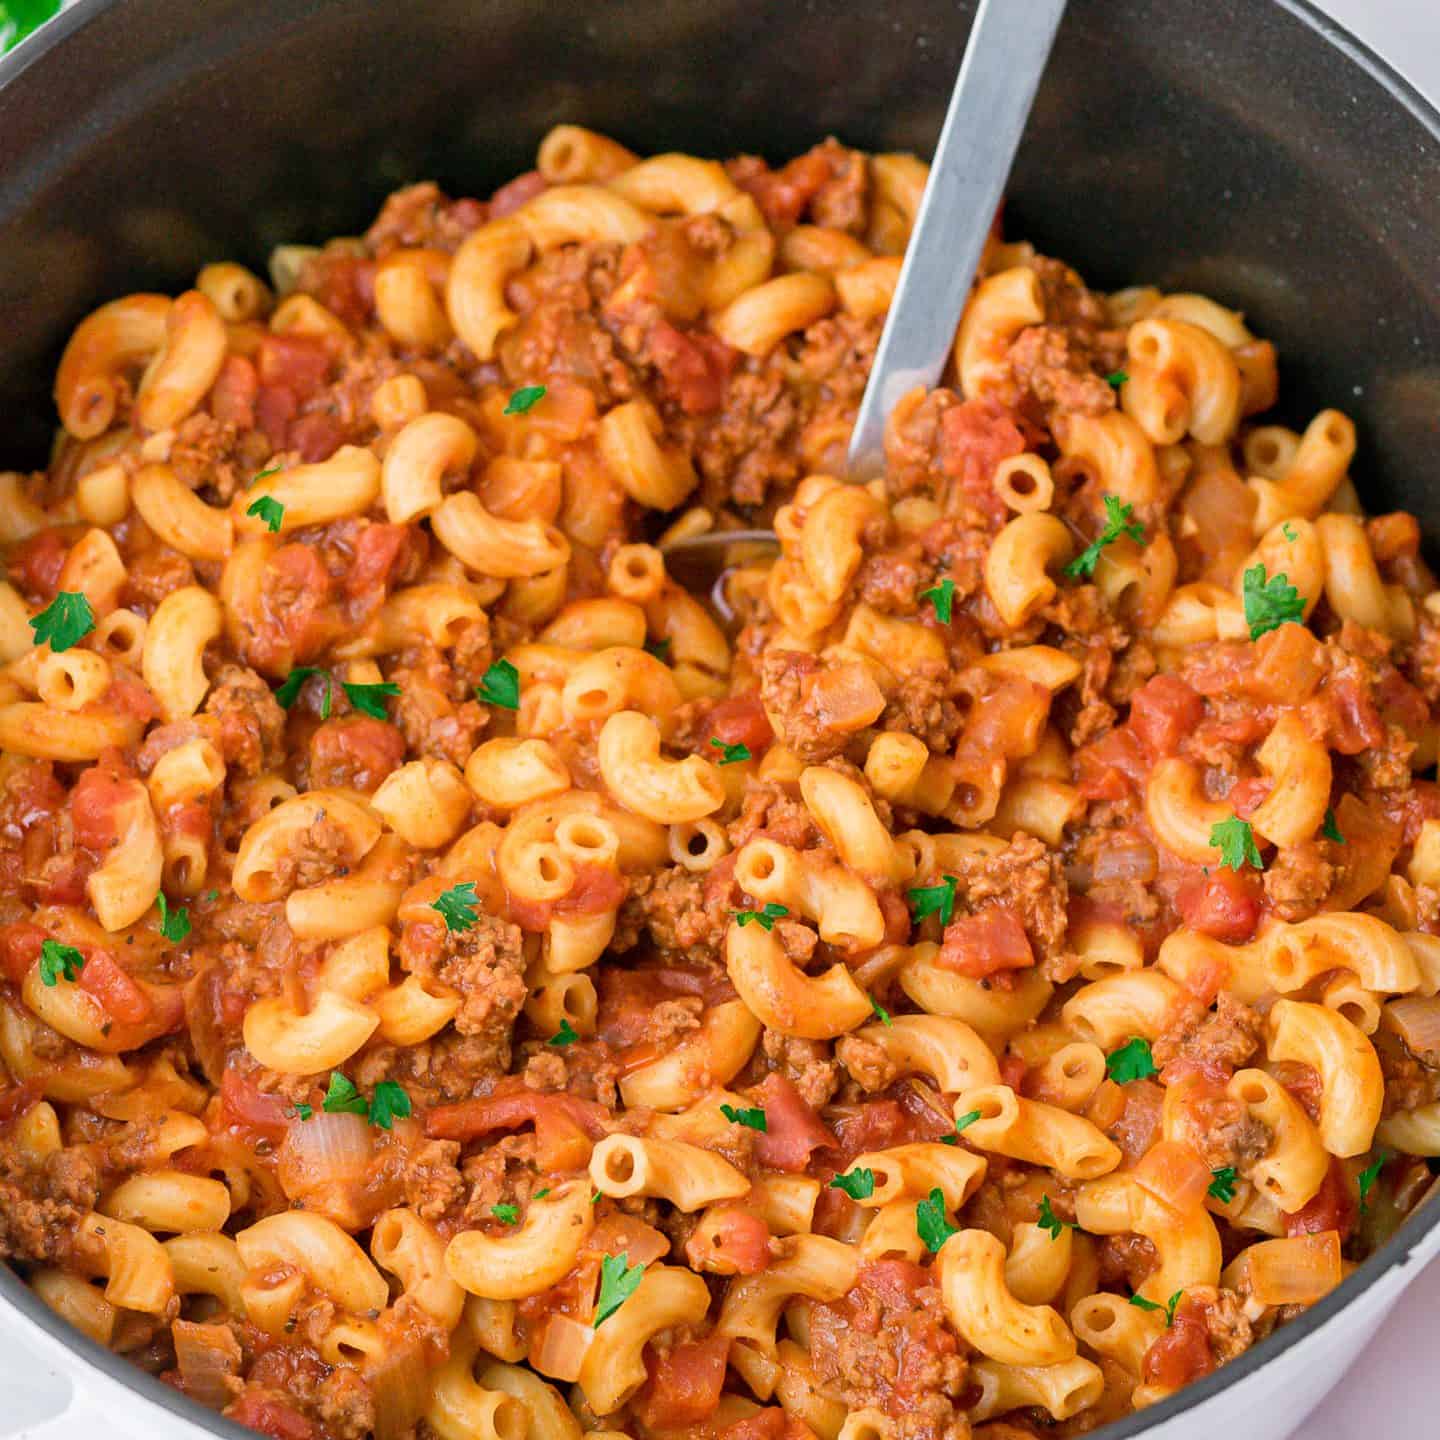 American Goulash Recipe Ready In 5 Steps Cooks In One Pot